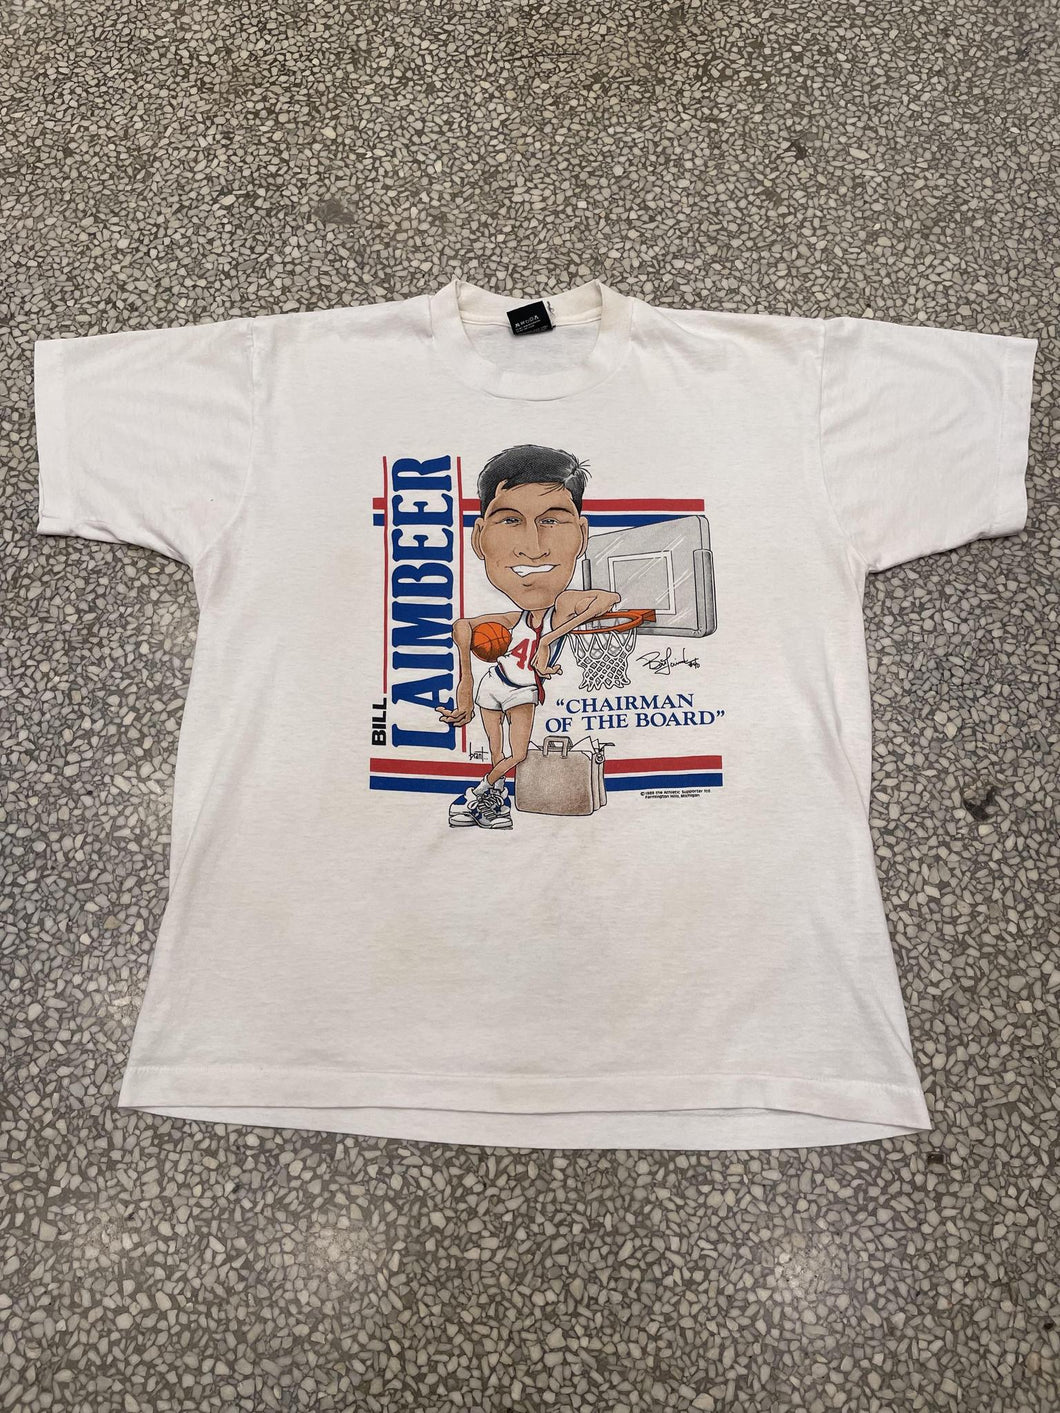 Detroit Pistons Vintage 1989 Bill Laimbeer Chairman of The Board ABC Vintage 